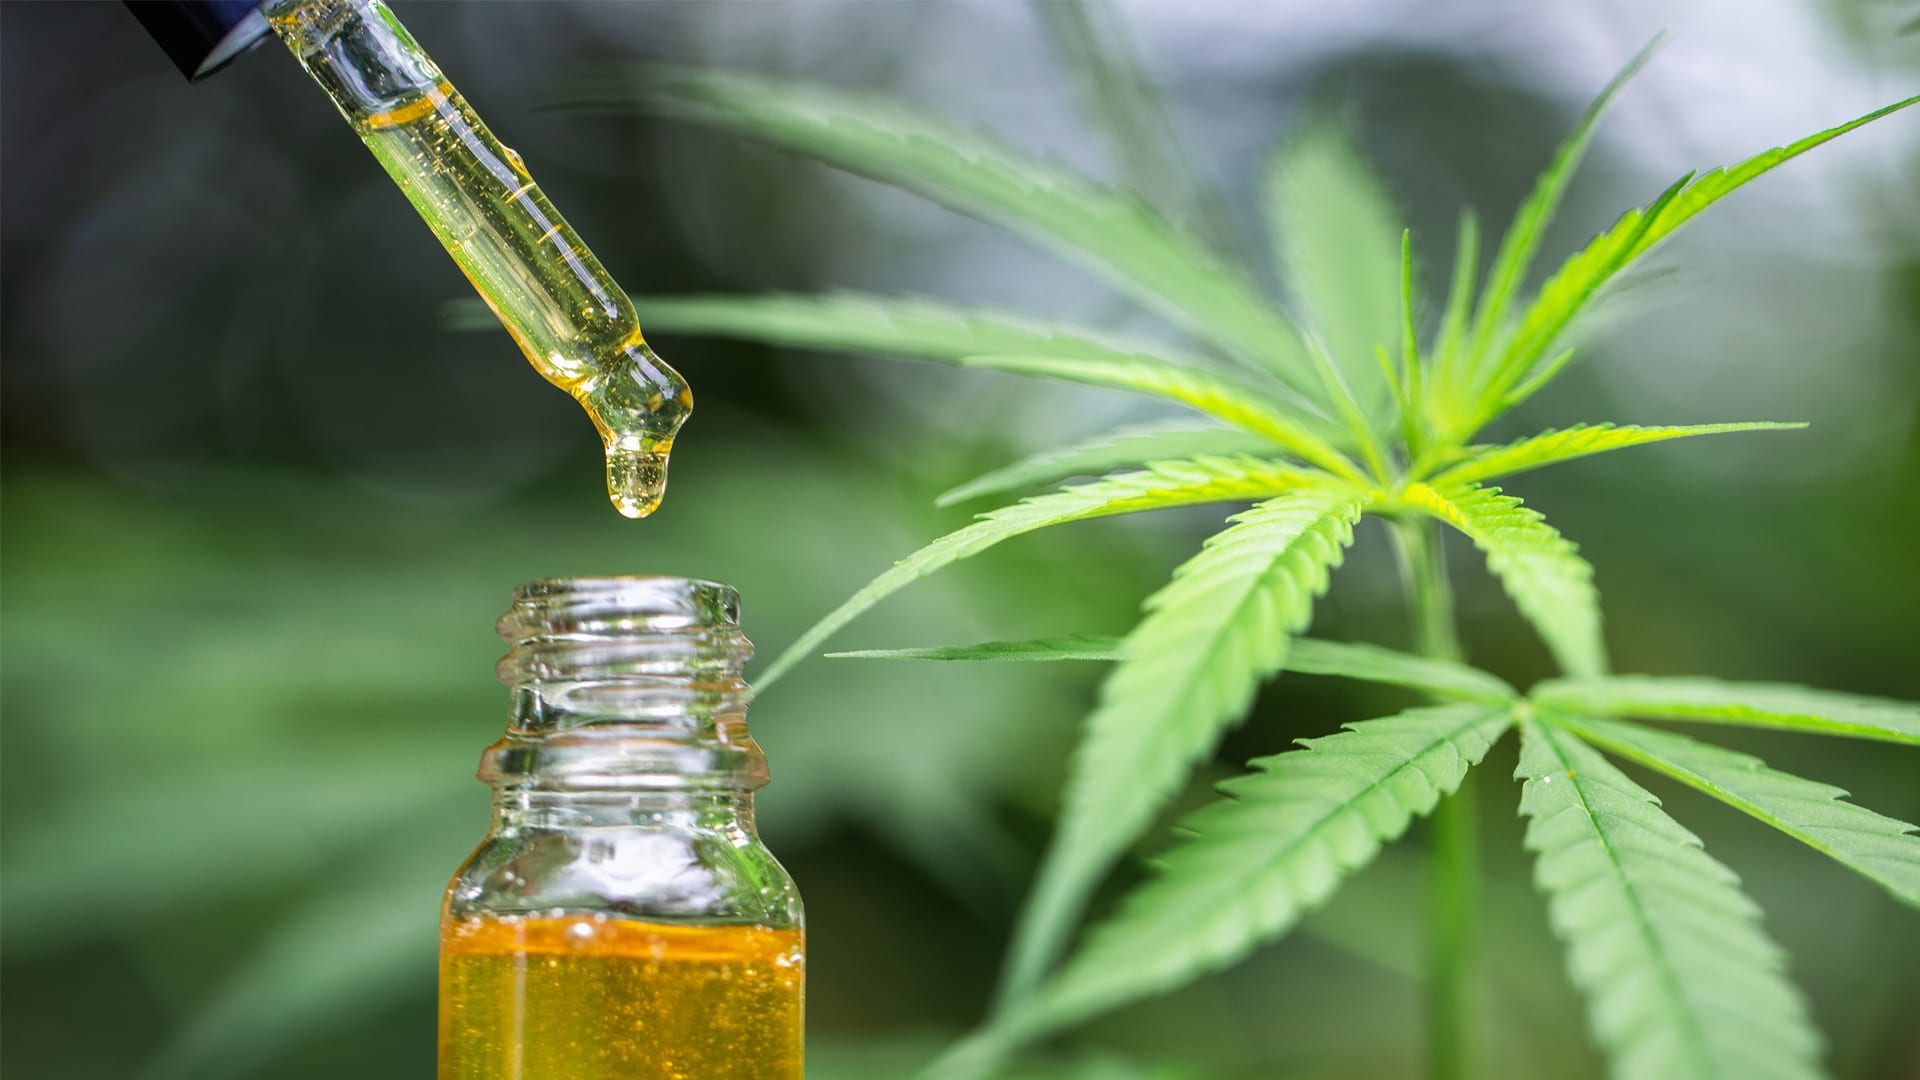 CBD oil: The Cure to Pain, Anxiety, and Sleep Disorder - Latest World Trends